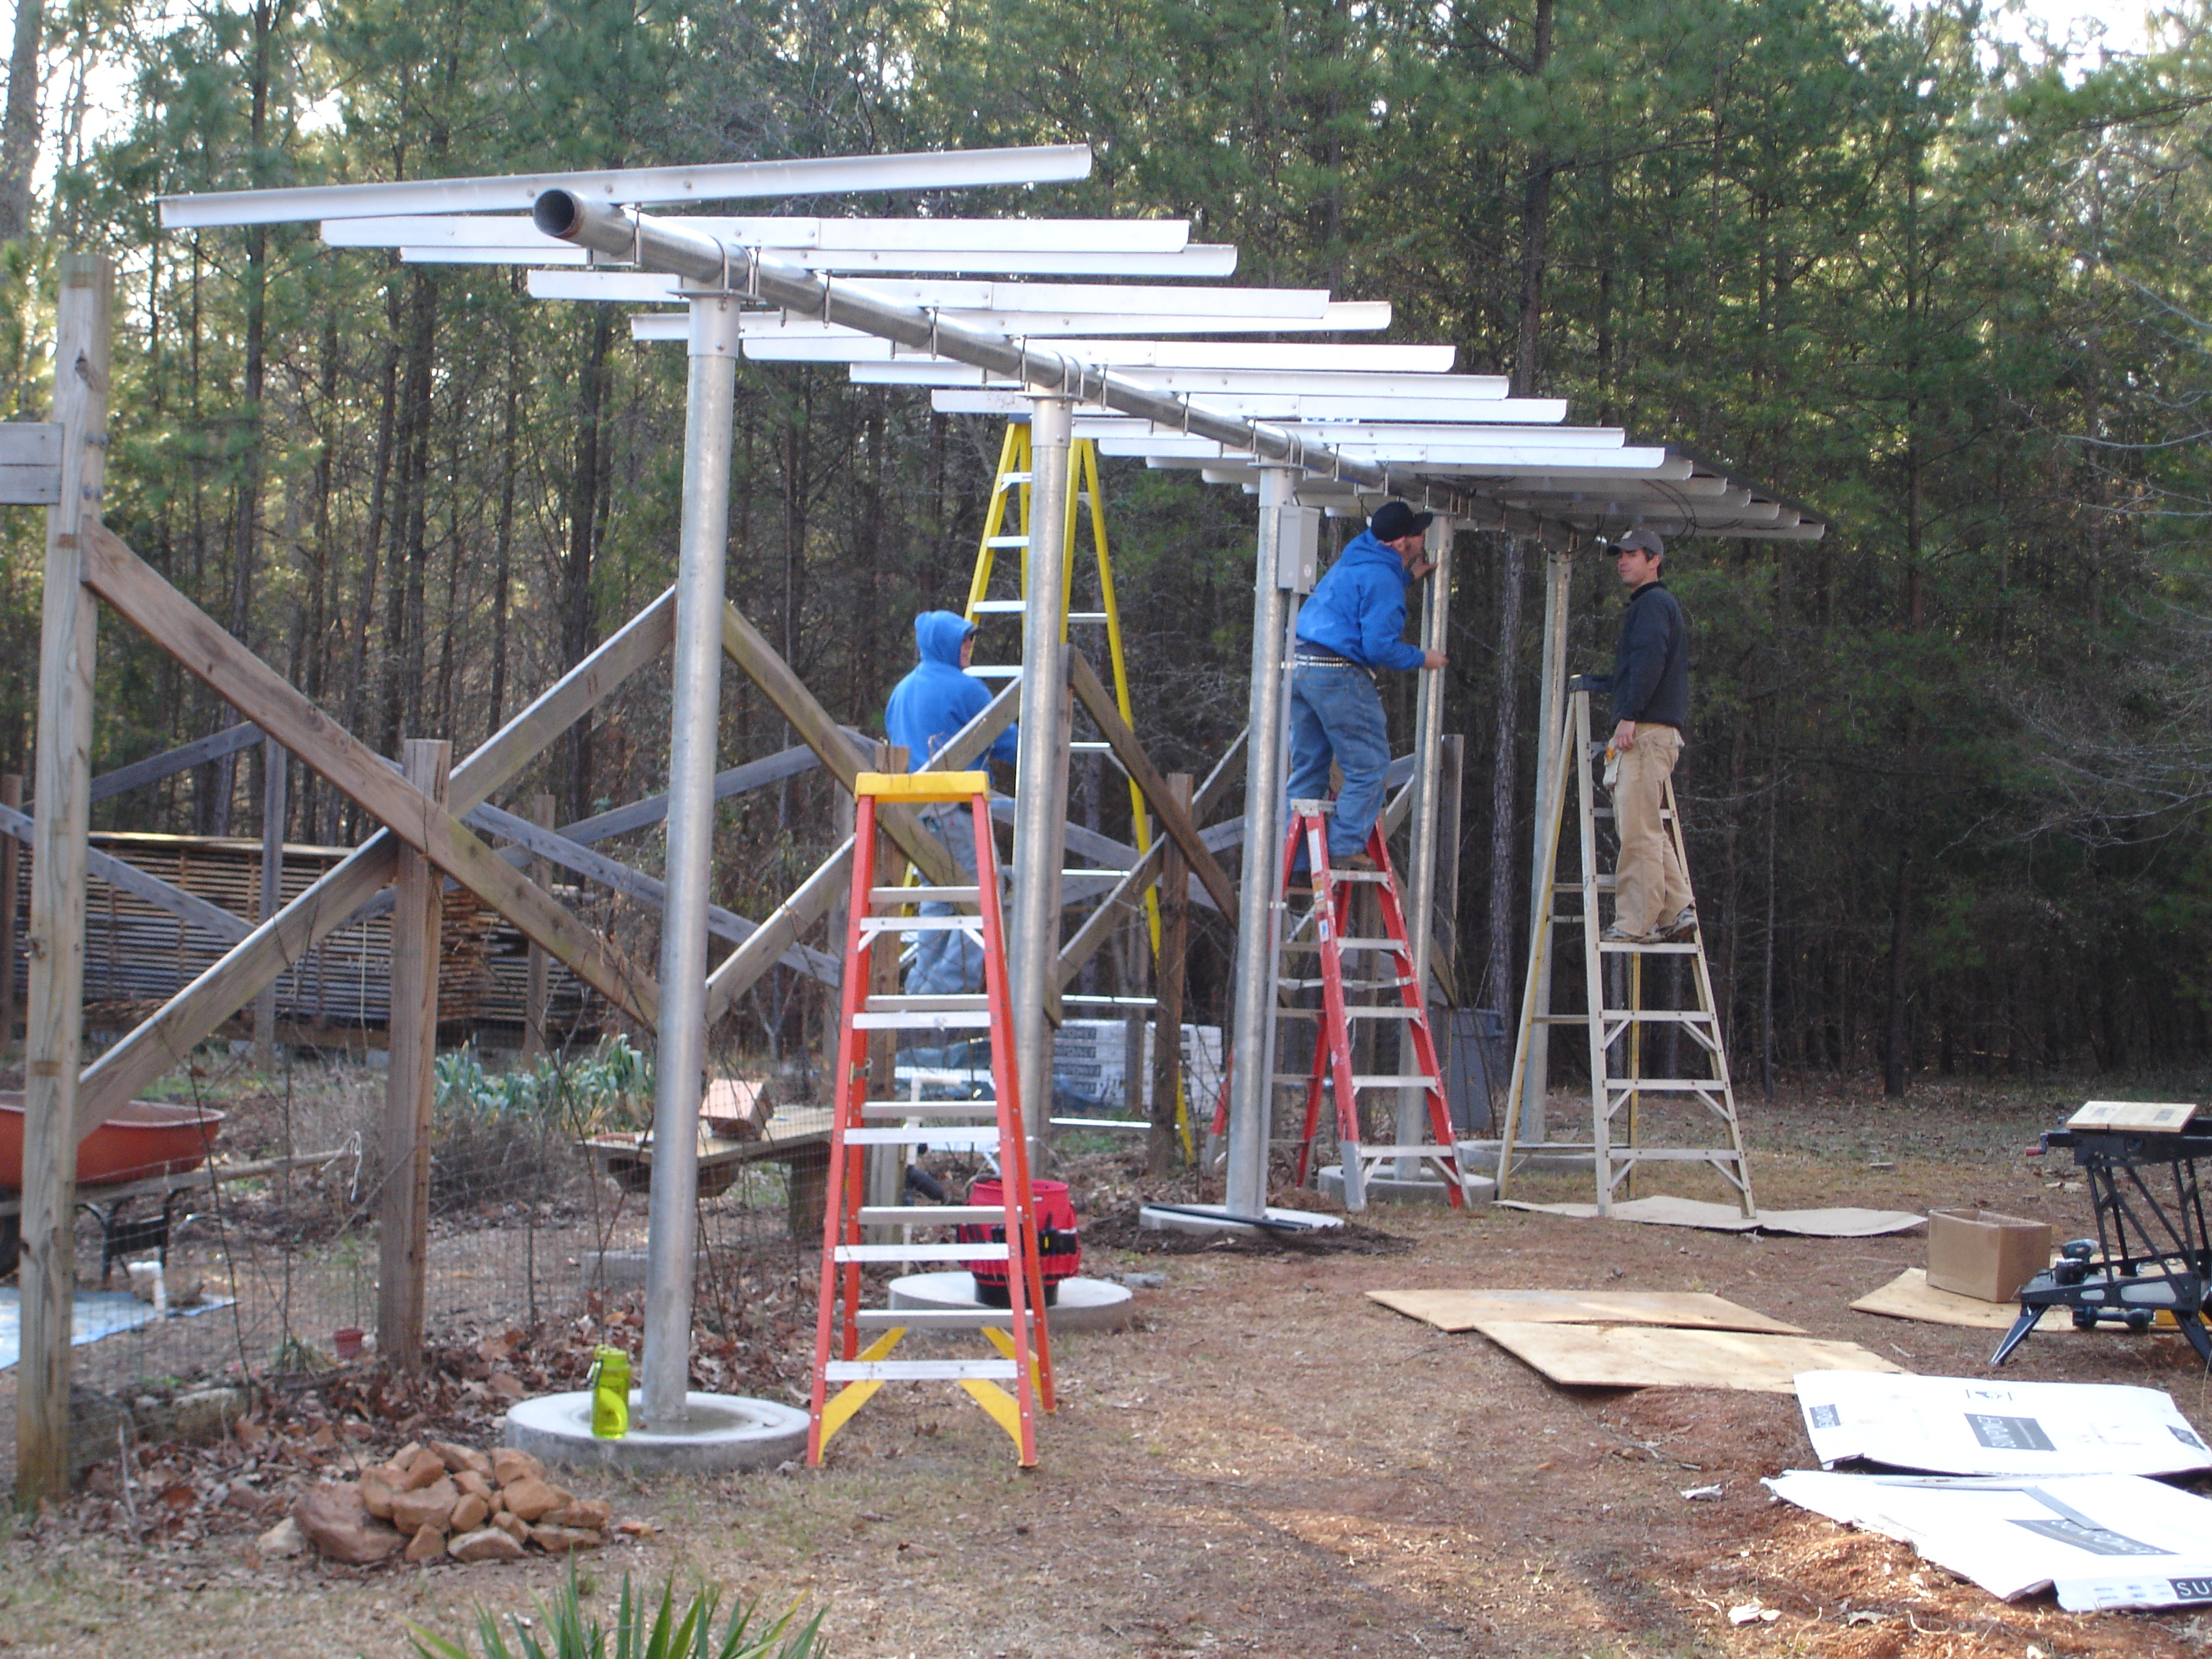 An installation view showing the vertical poles set in concrete and the mounting structure for the solar panels being readied.